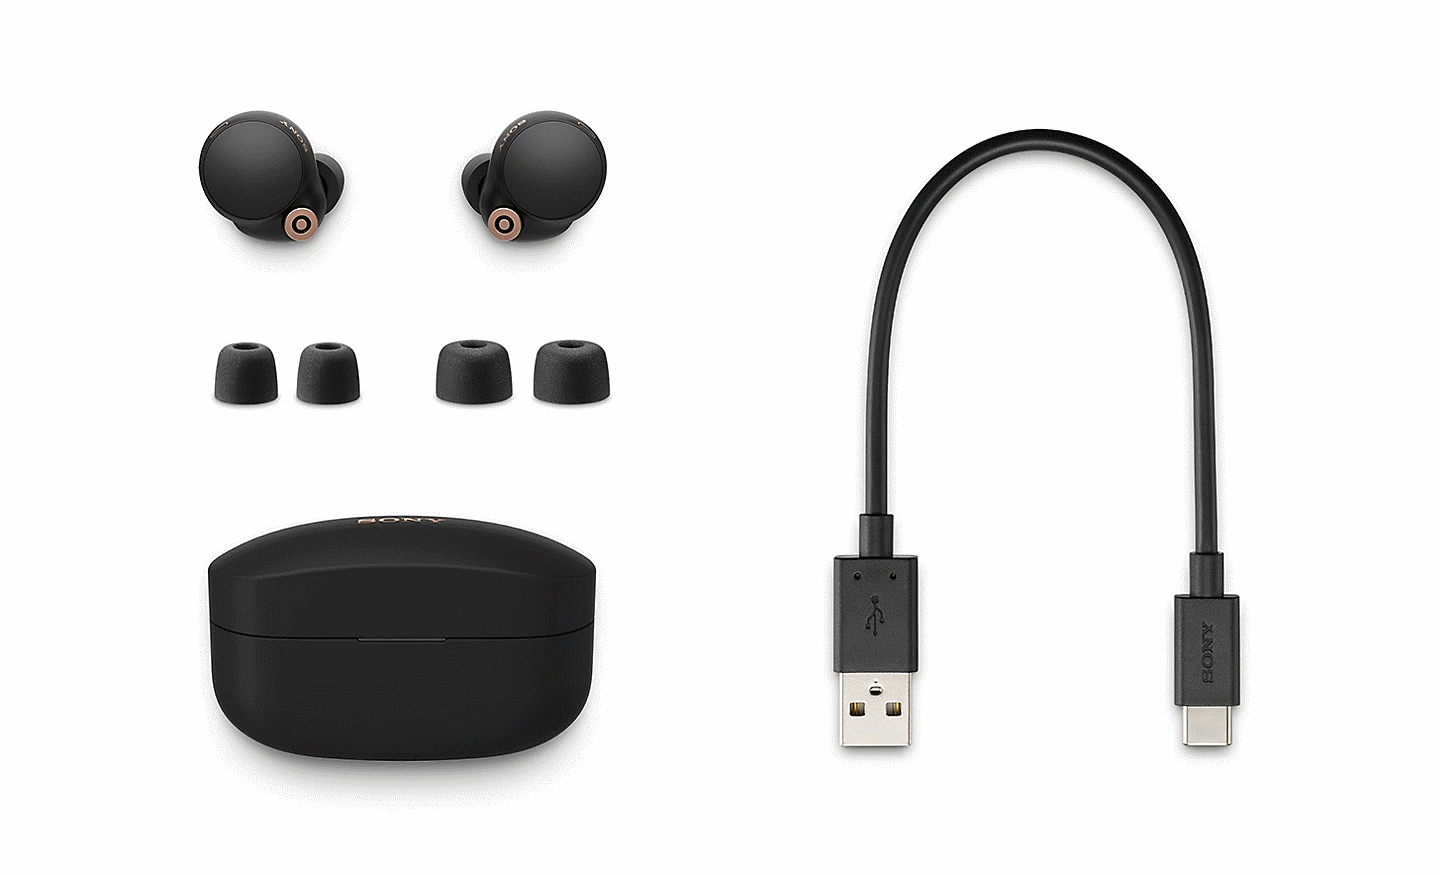 Pair of WF-1000XM4 headphones with charging case, three sizes of Noise Isolation Earbud Tips and a USB-C charging cable.